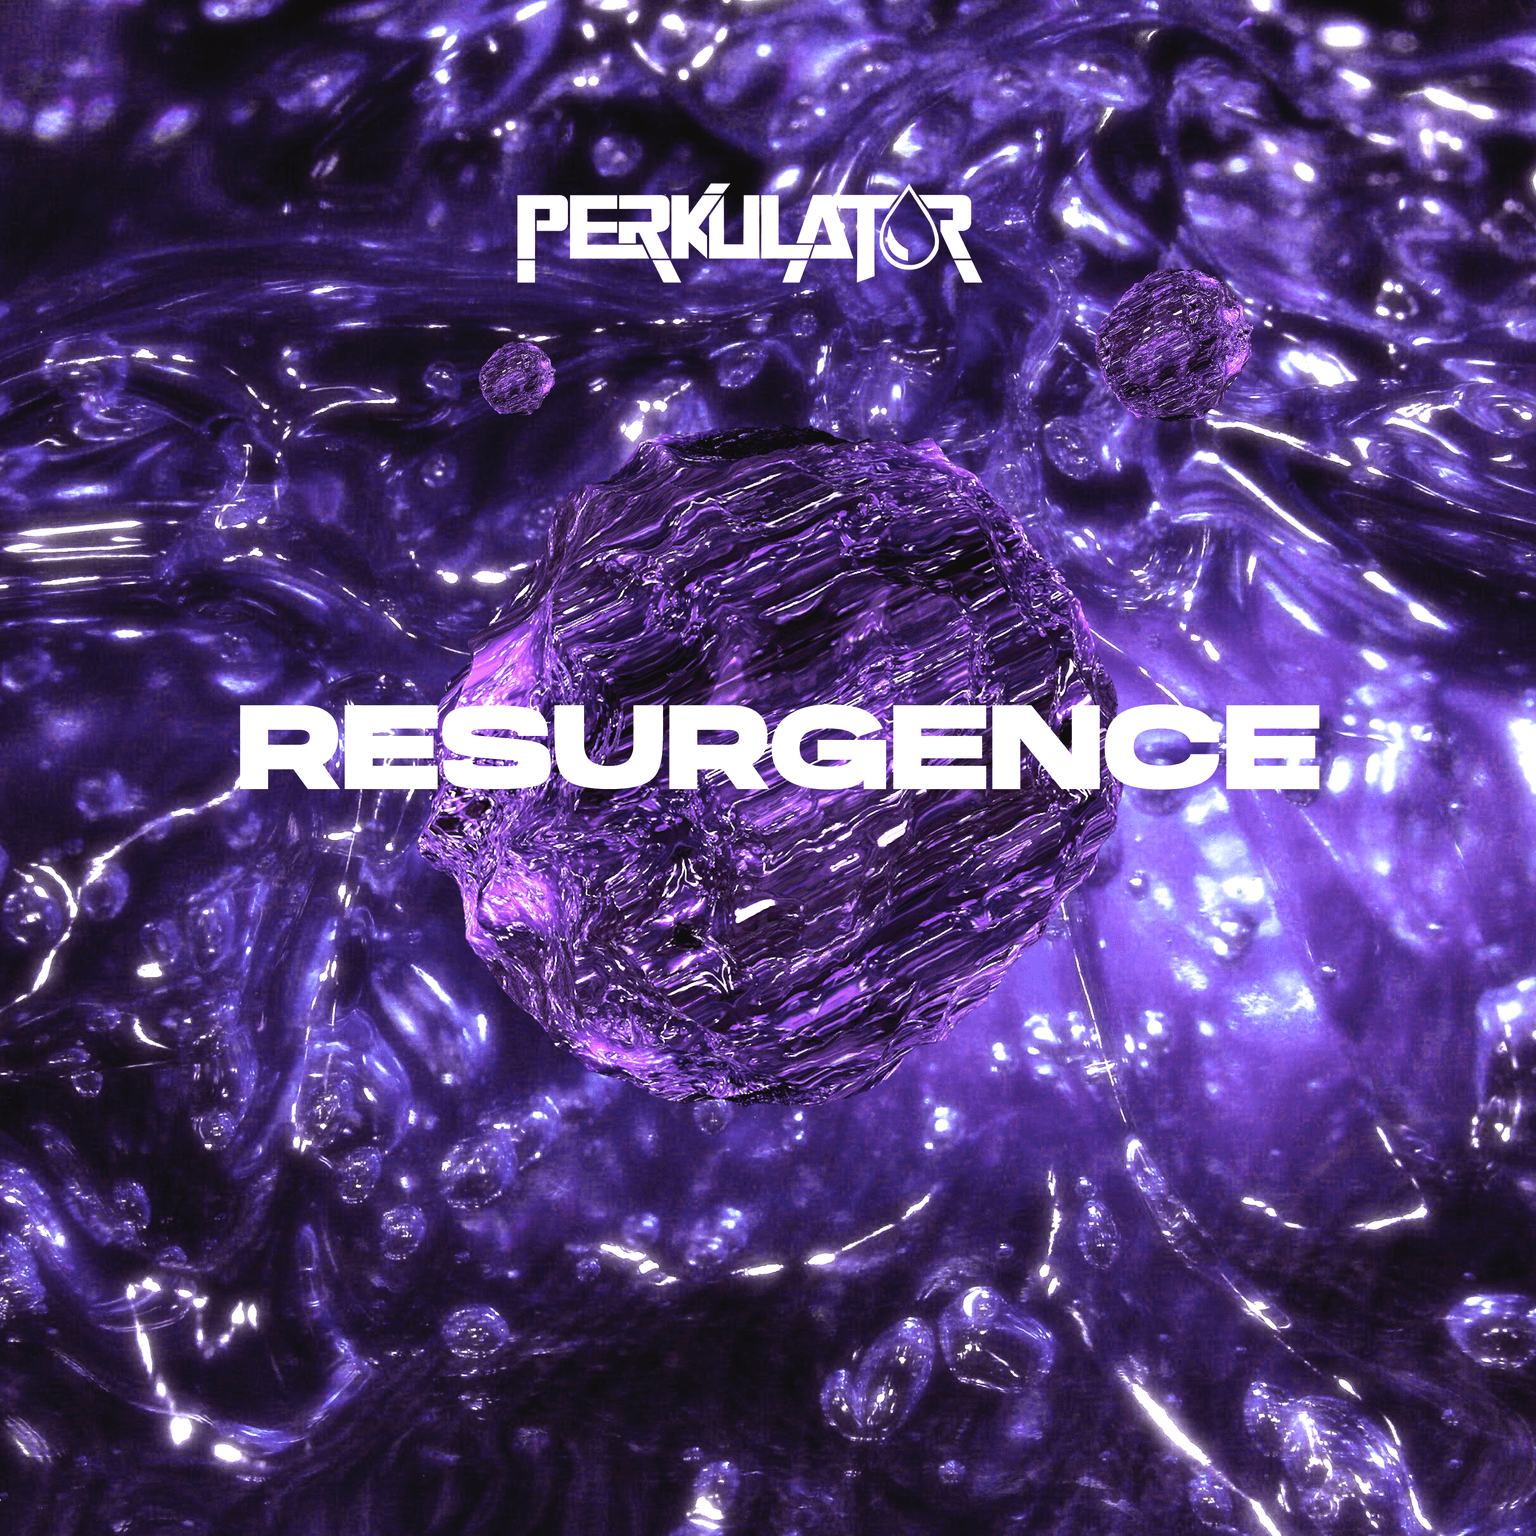 The ‘Resurgence’ of Perkulat0r [EXCLUSIVE INTERVIEW & PREMIERE]